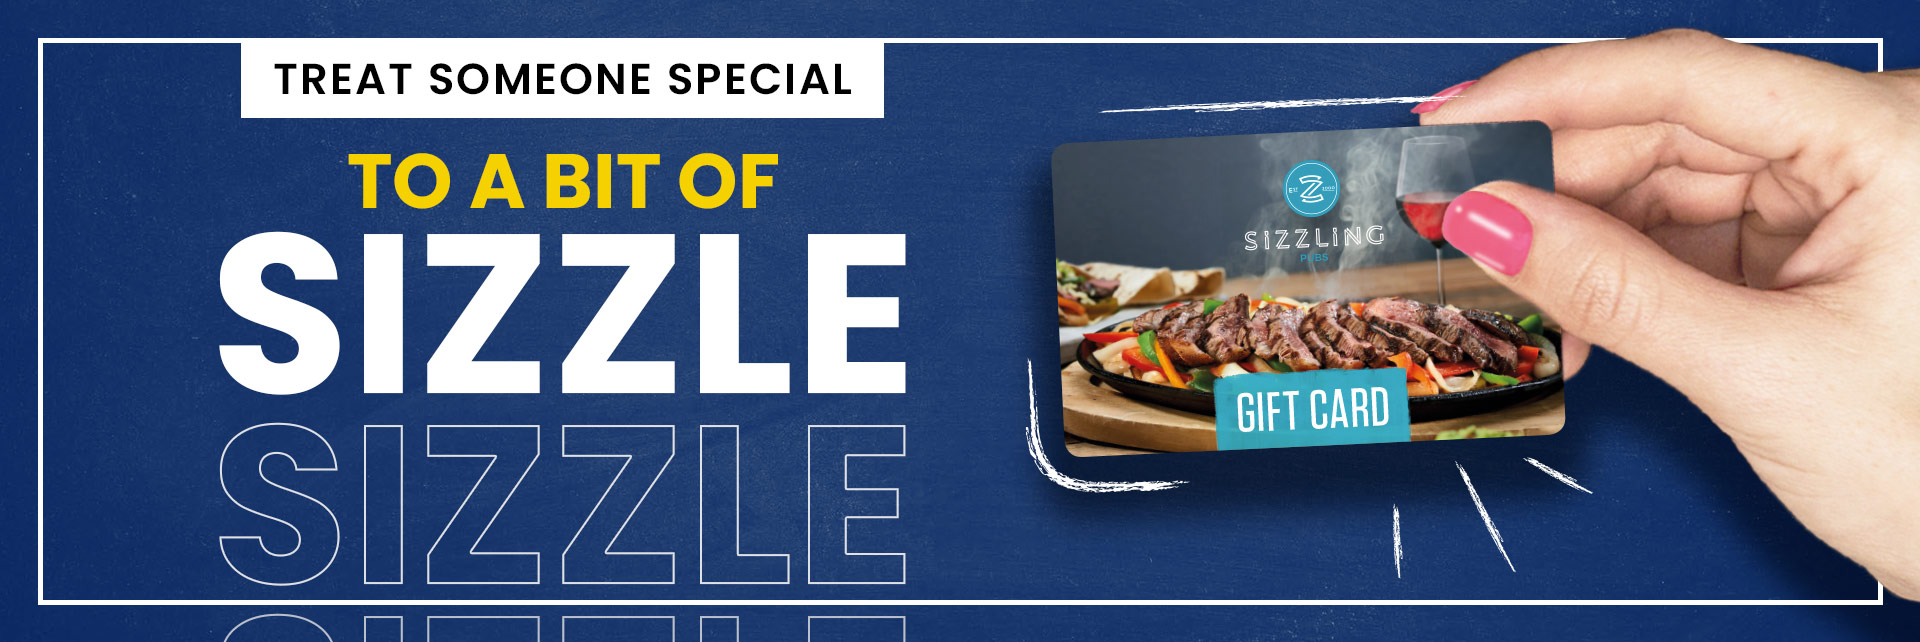 Sizzling Pubs Gift Card at The Treacle Mine in Grays